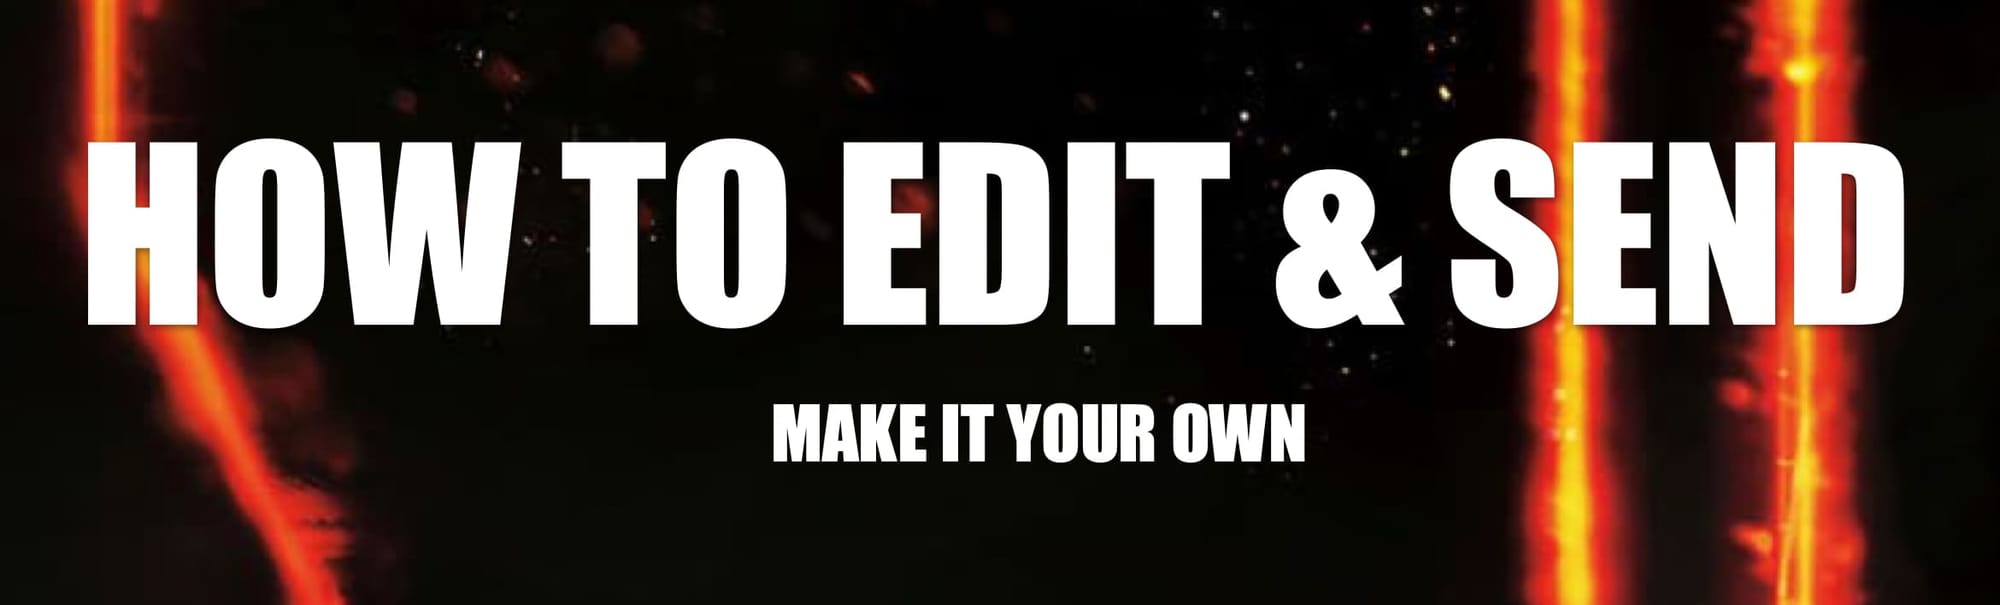 HOW TO EDIT & SEND - MAKE IT YOUR OWN - HEADER